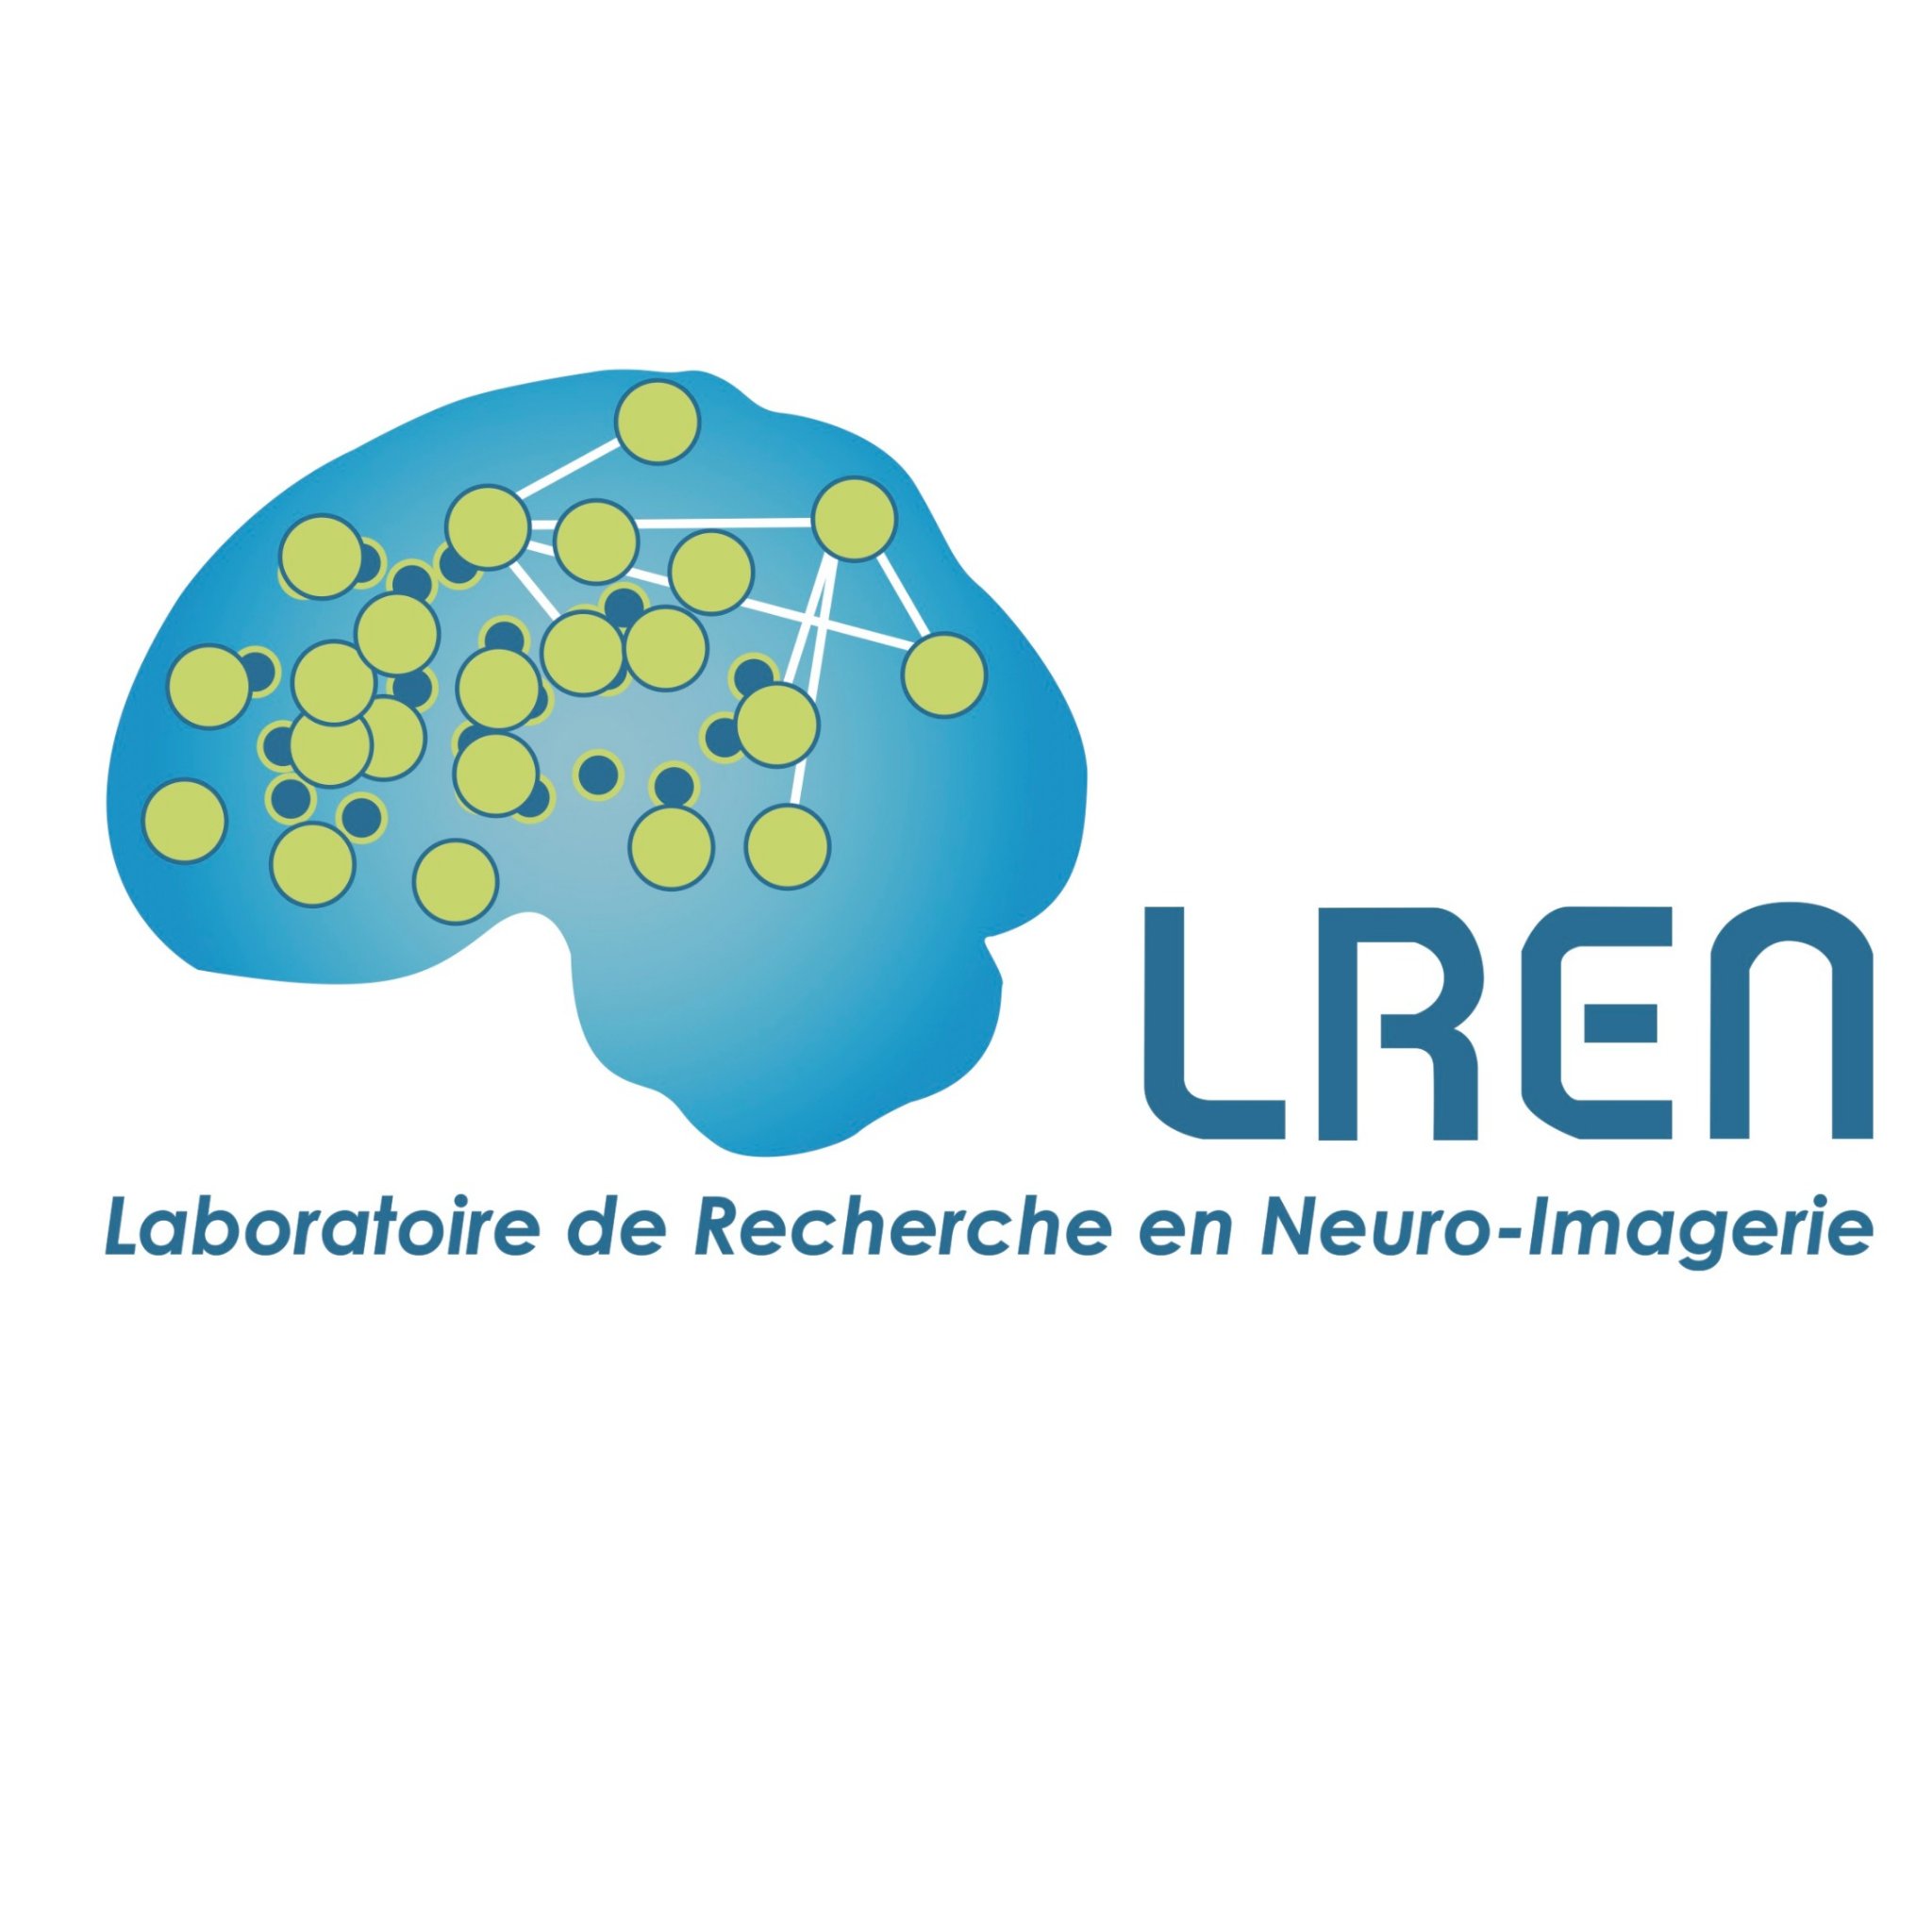 LRENs main goal is to translate basic research findings into clinical applications for early diagnosis of disease and for prediction of clinical outcome.